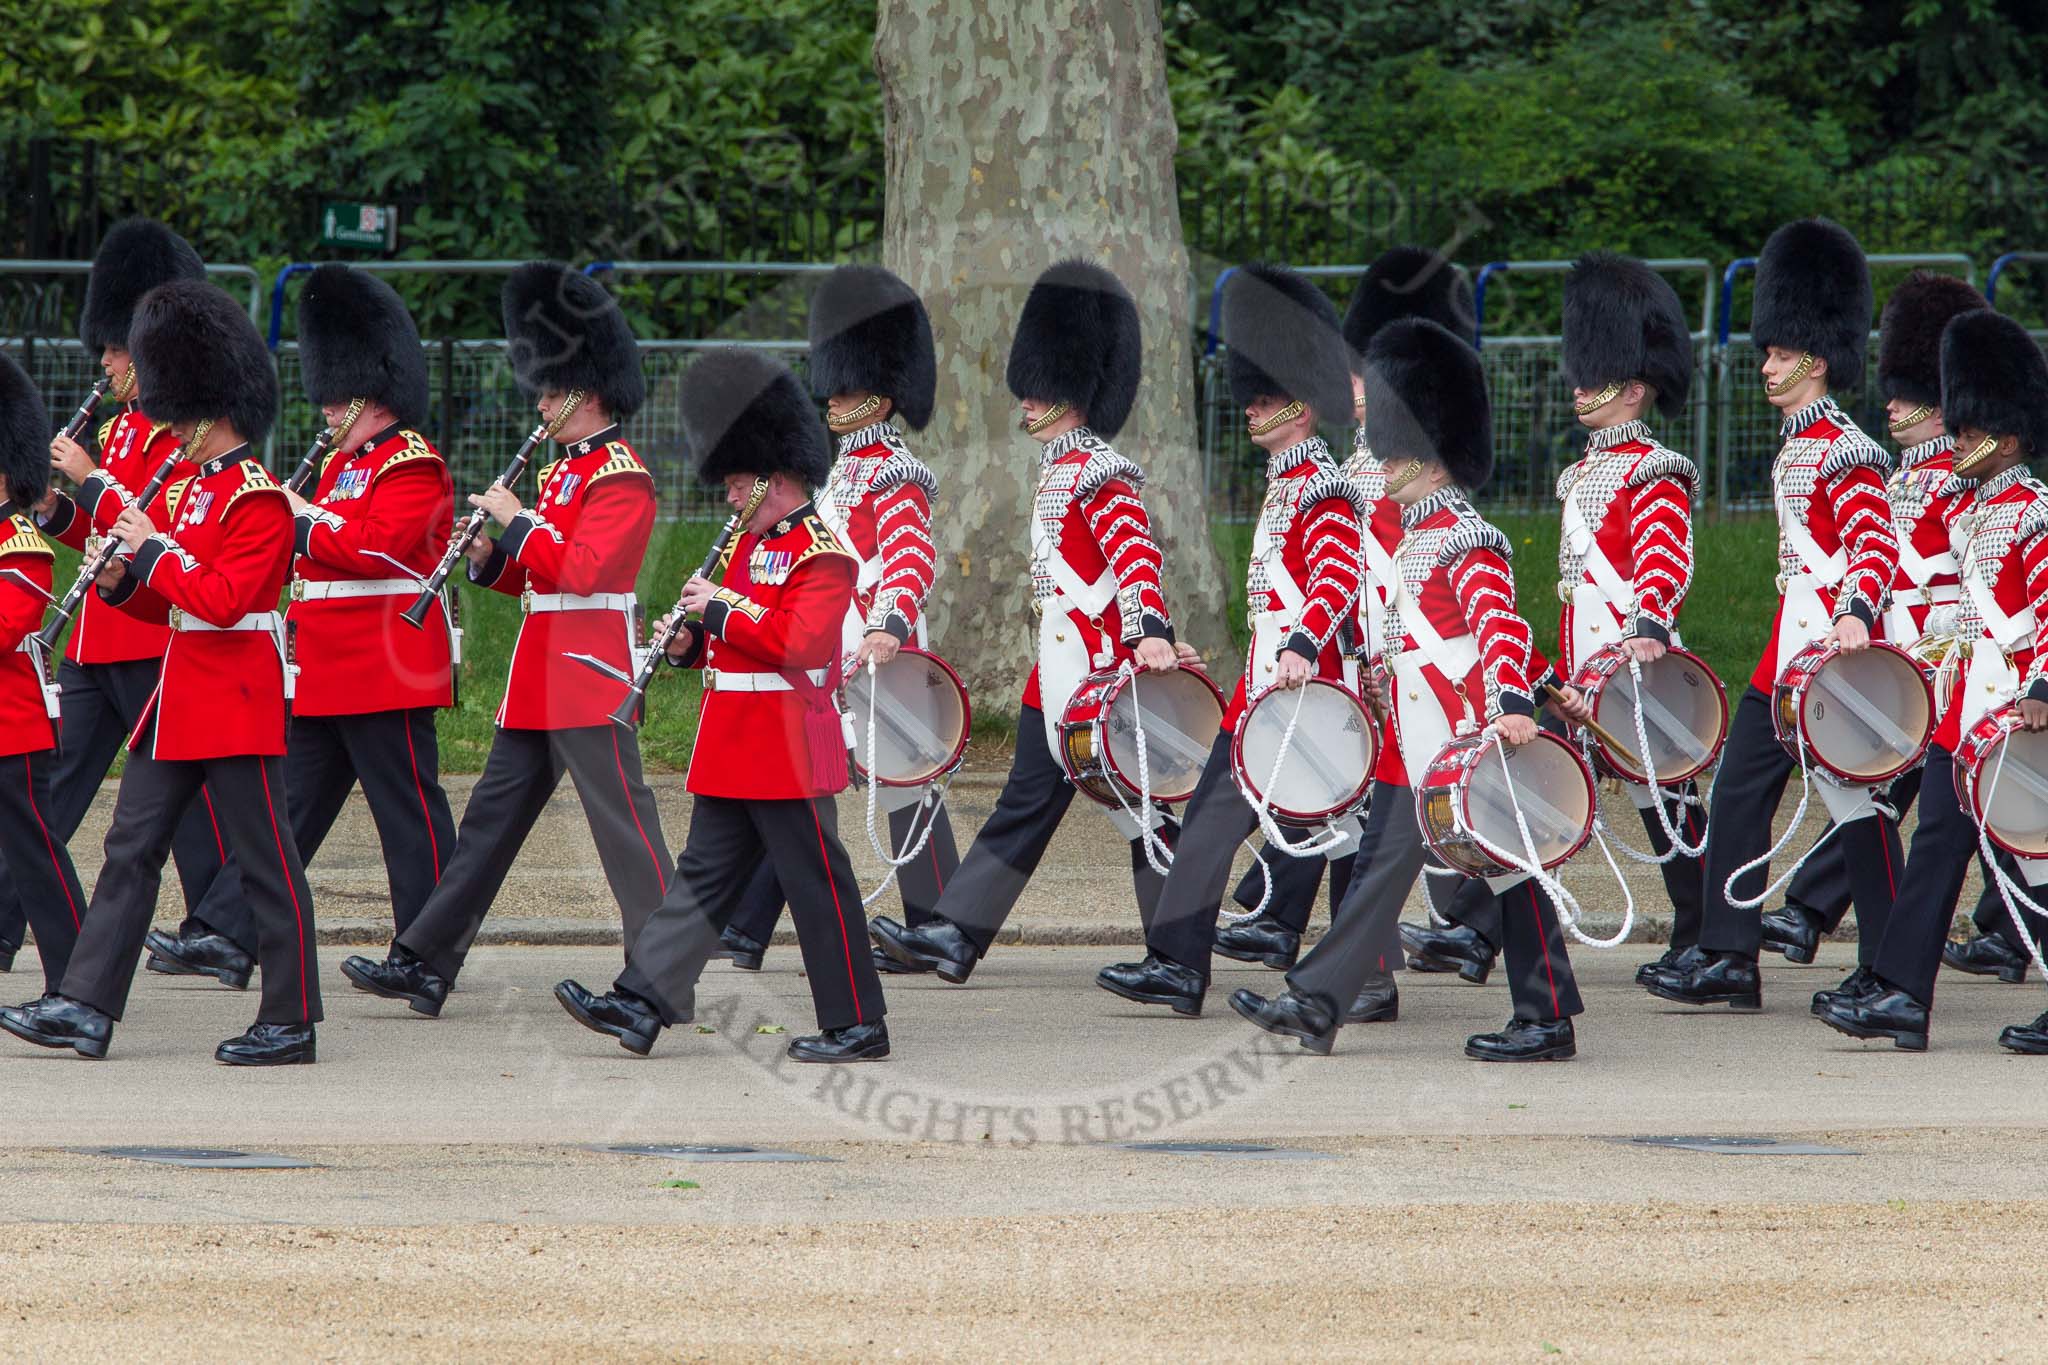 The Colonel's Review 2012: The Band of the Coldstream Guards, marching along the Northern line of Horse Guards Parade, along St James's Park..
Horse Guards Parade, Westminster,
London SW1,

United Kingdom,
on 09 June 2012 at 10:29, image #74